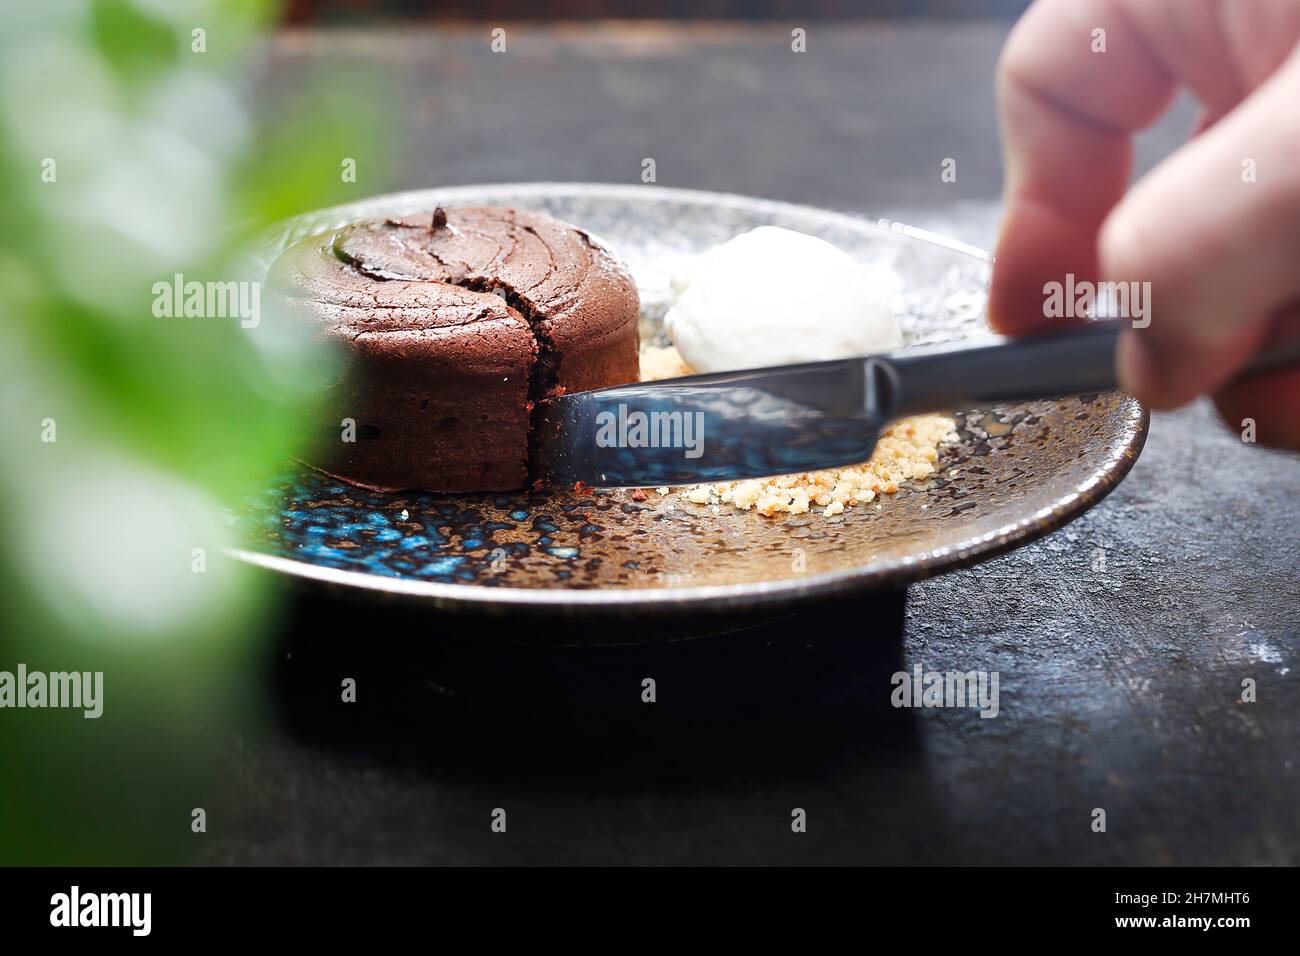 Chocolate cake with ice cream and nuts. Tasty sweet dessert. A tasty dish.Culinary photography. Suggestion to serve the dish. Stock Photo